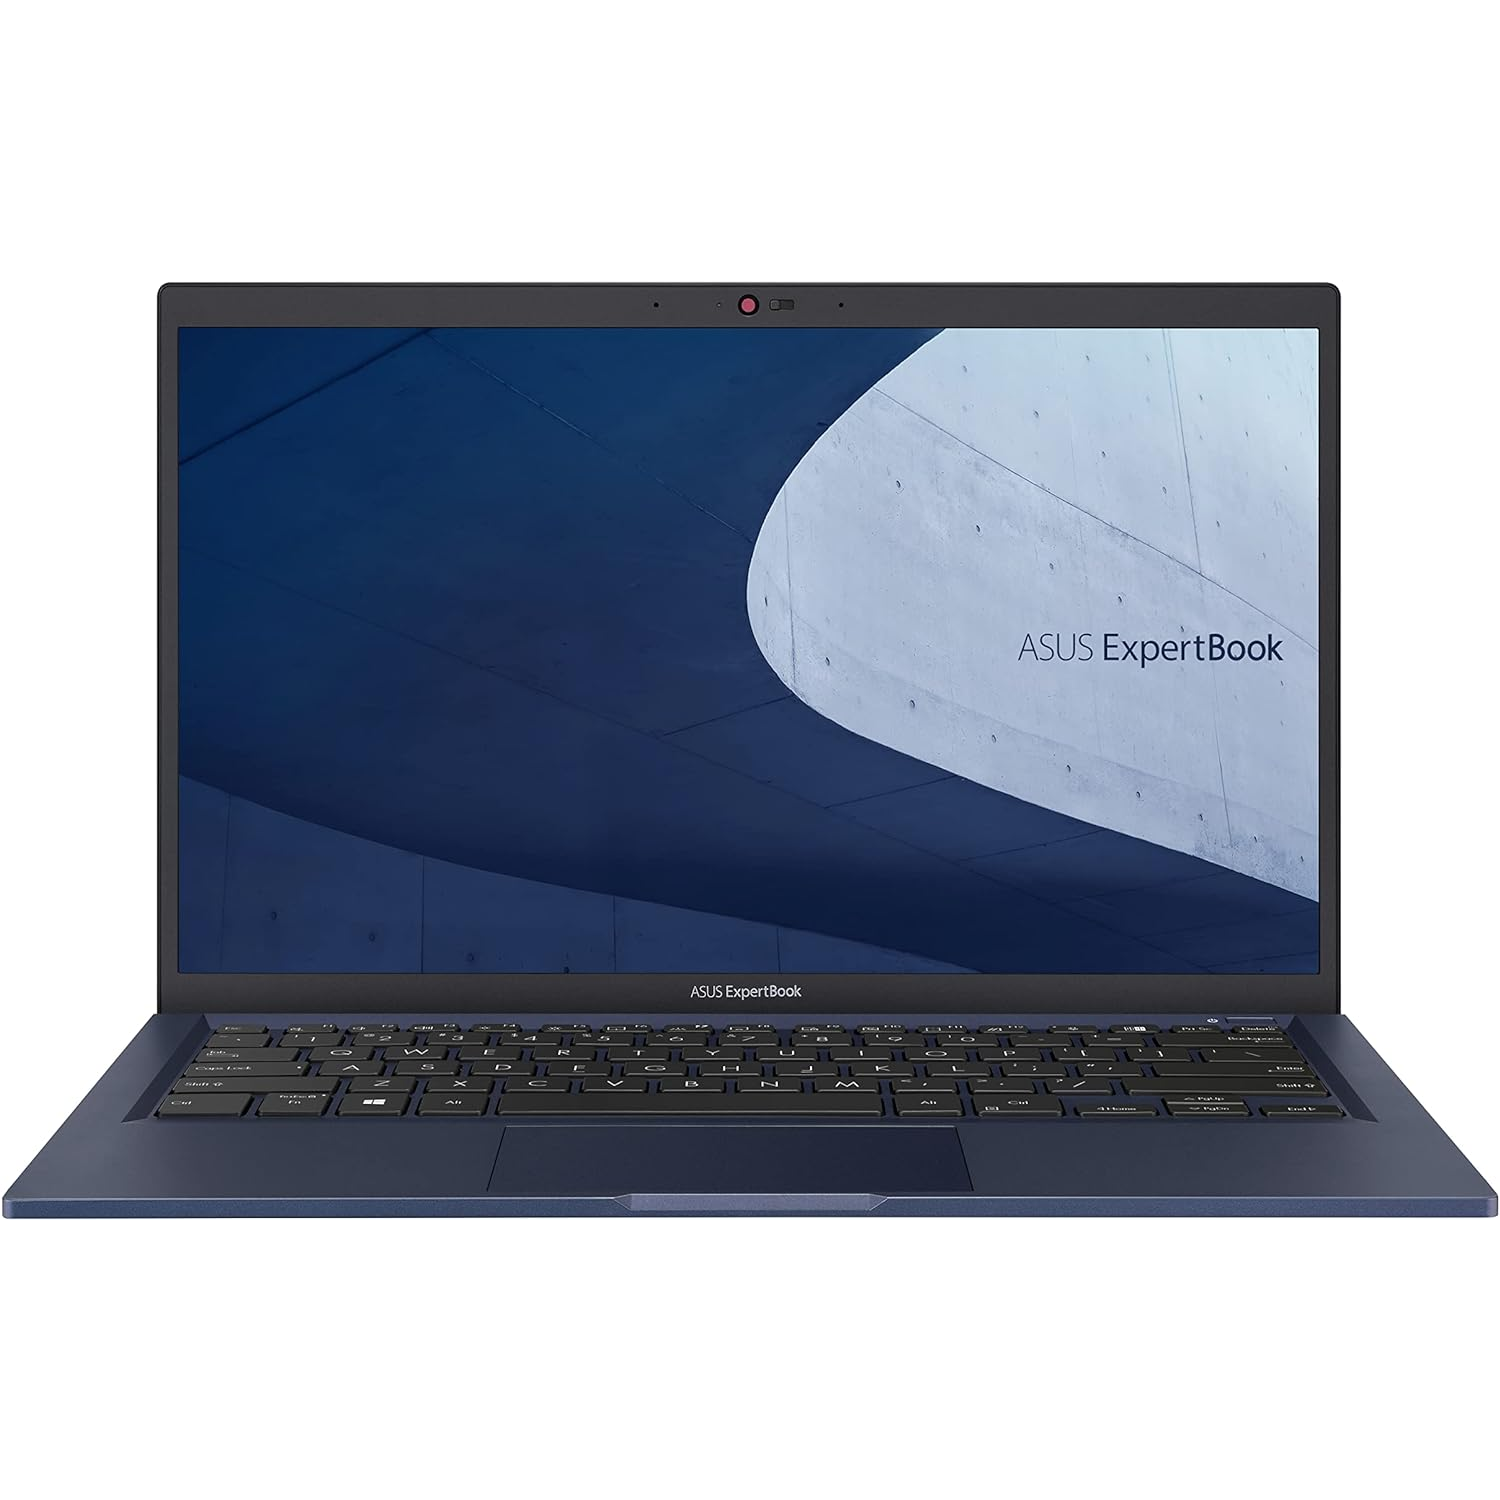 Asus ExpertBook B1 14" FHD, Intel i5-1135G7 (4-Cores) 16GB RAM, 1TB NVMe SSD, WiFi 6, Military Grade Business Laptop, Win 10 Pro (upgradable to 11)